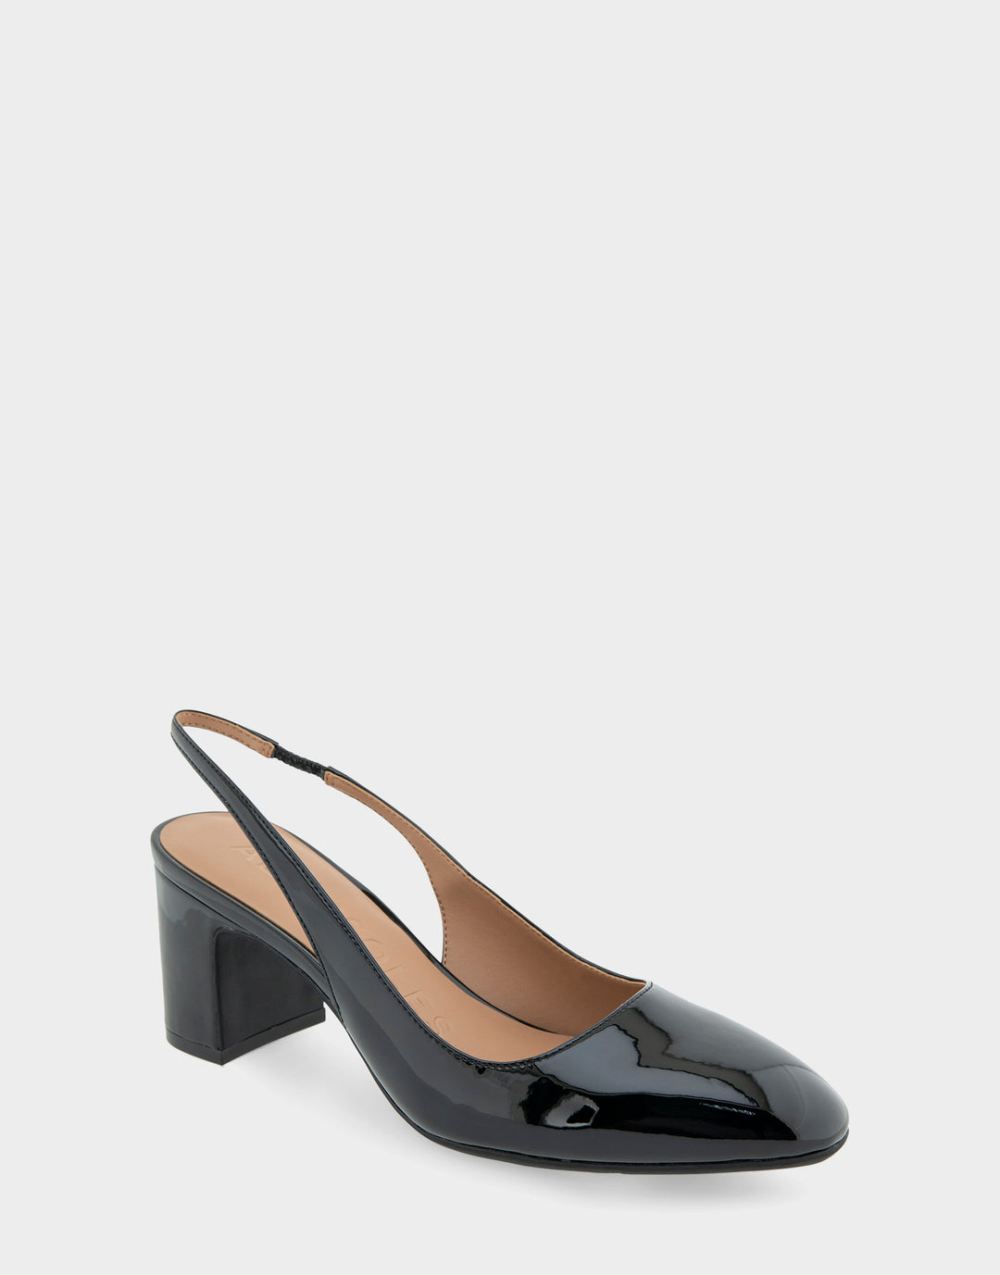 Women's | Mags Black Patent Faux Leather Slingback Mid-Heel Pump